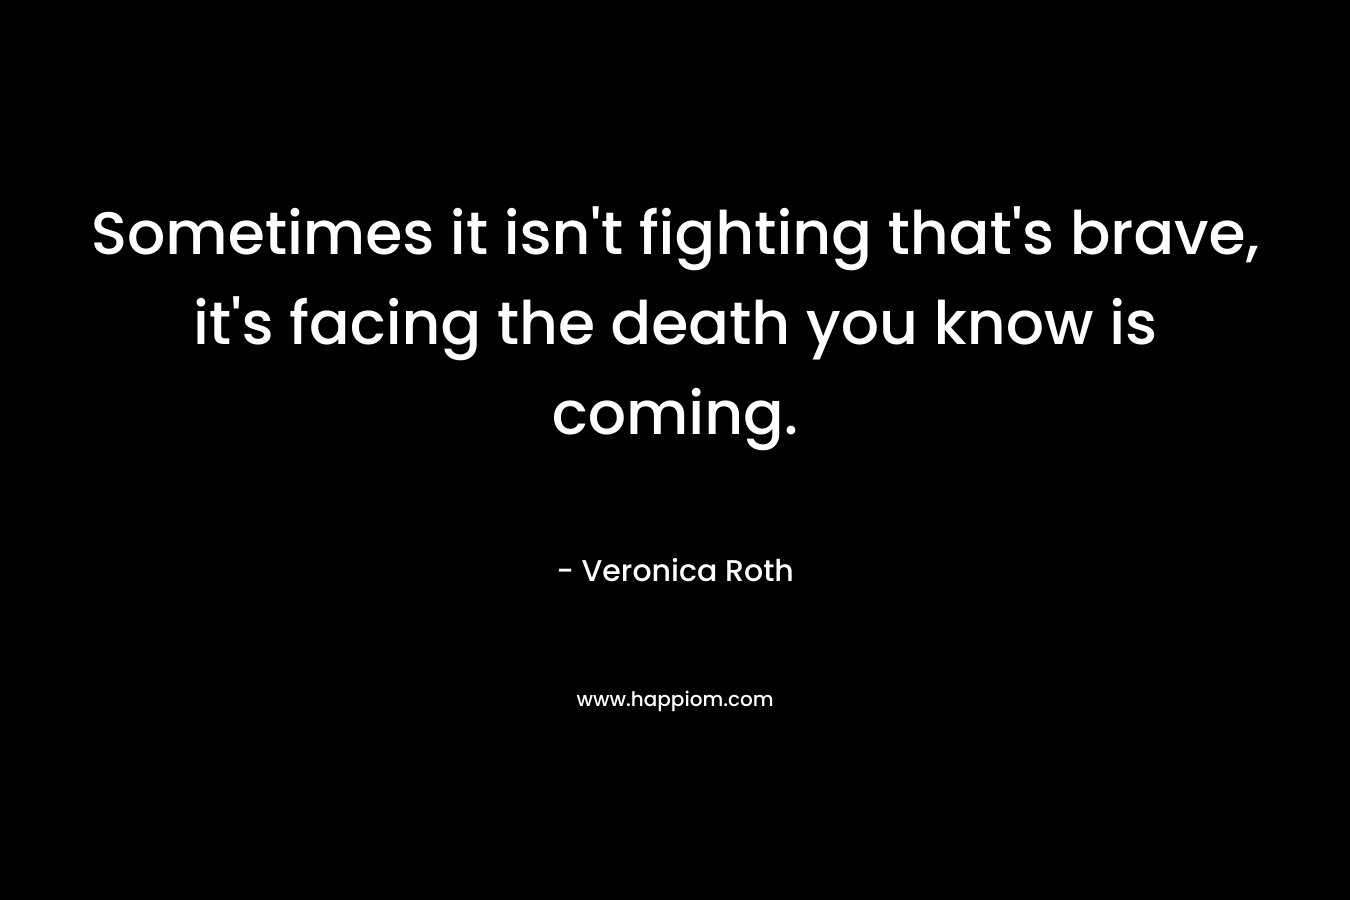 Sometimes it isn’t fighting that’s brave, it’s facing the death you know is coming. – Veronica Roth